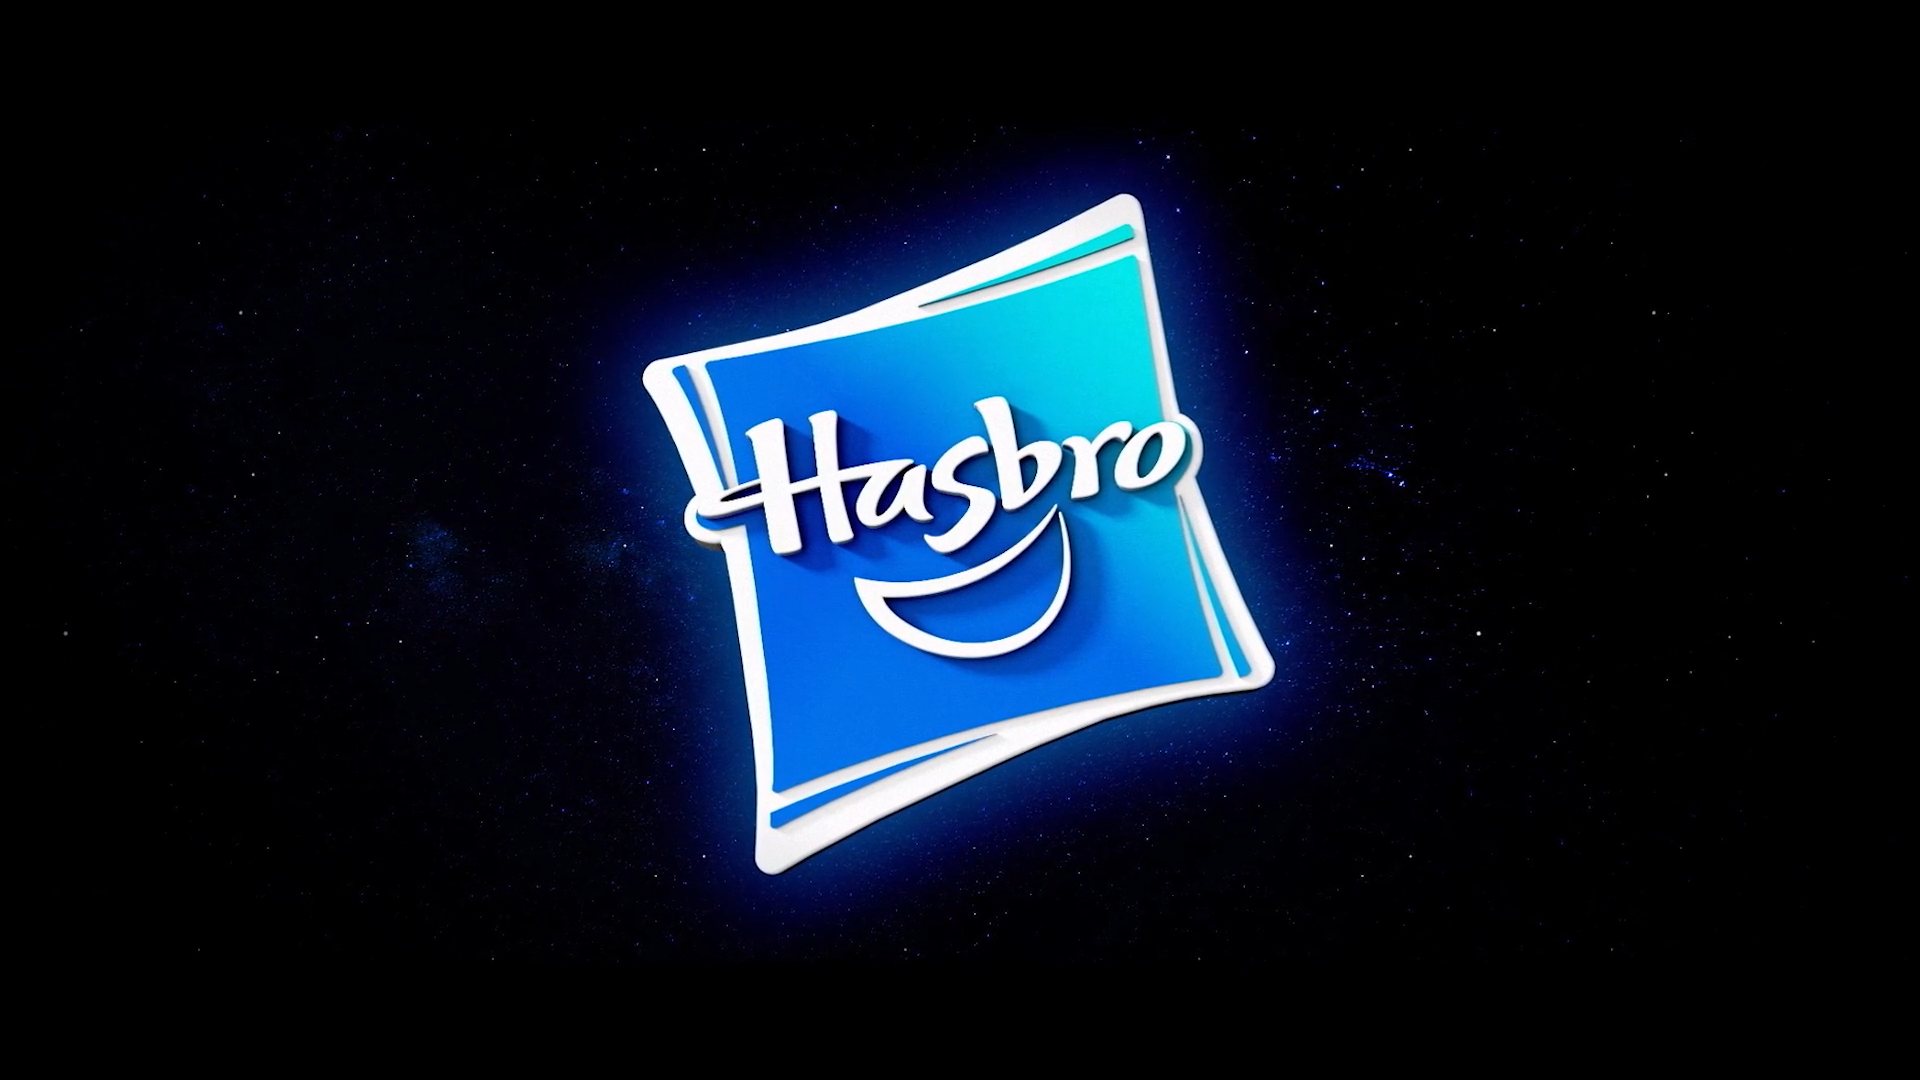 Hasbro And Shareholder Dispute Continues Ahead Of Annual Meeting